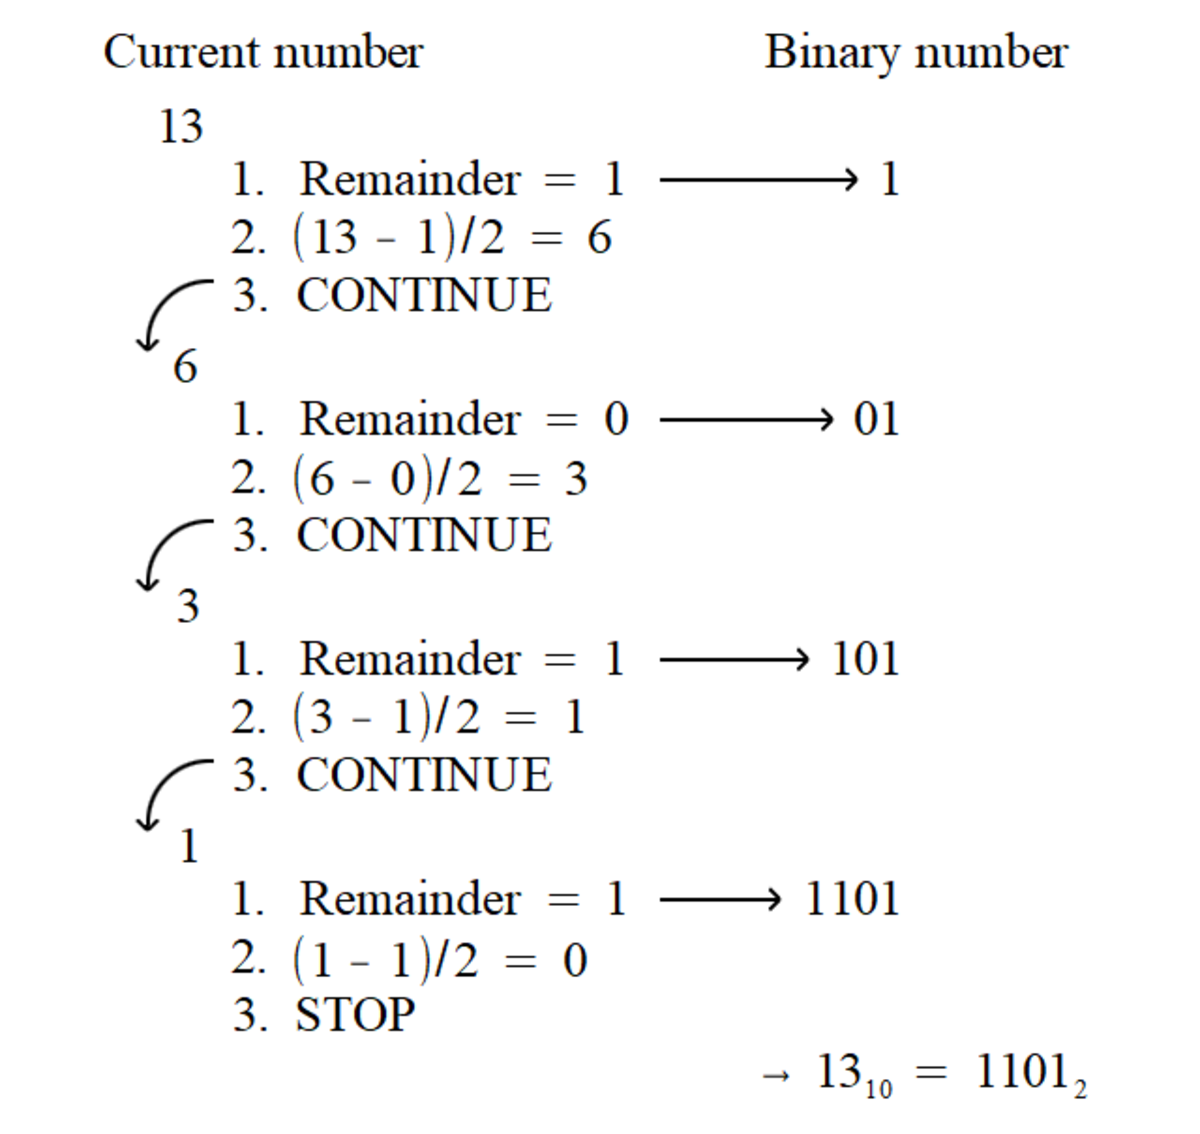 An example of following the steps to convert the number thirteen into its binary representation.